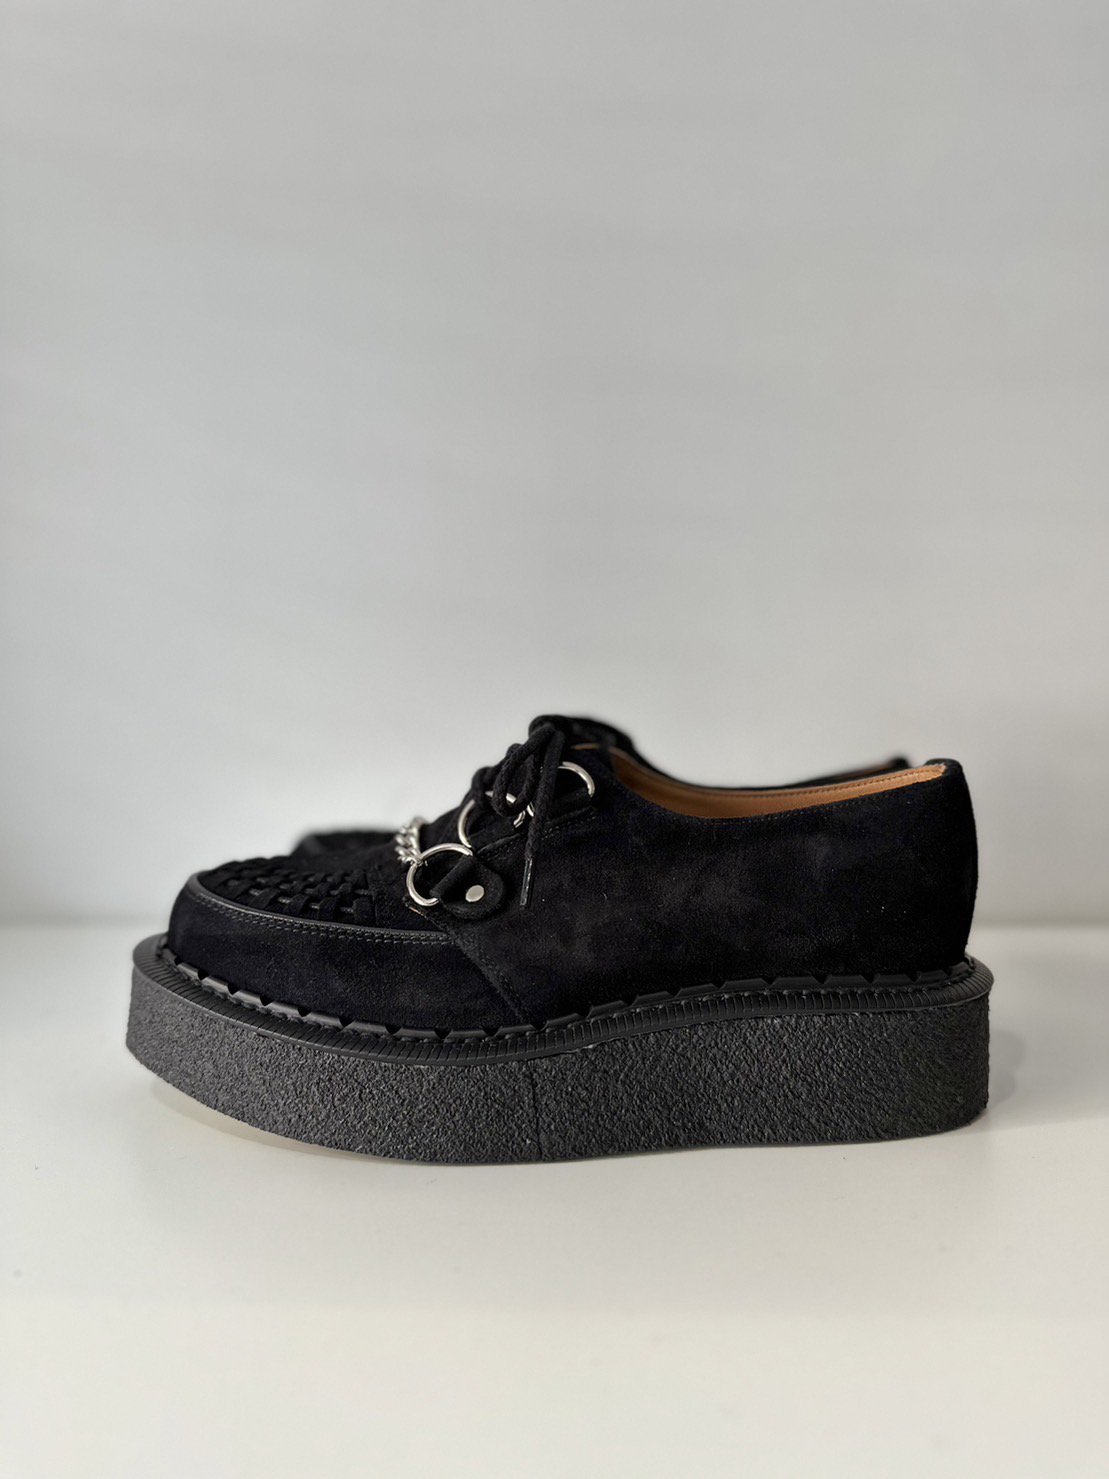 GEORGE COX<br />Chain Skipton / Black Suede<img class='new_mark_img2' src='https://img.shop-pro.jp/img/new/icons47.gif' style='border:none;display:inline;margin:0px;padding:0px;width:auto;' />